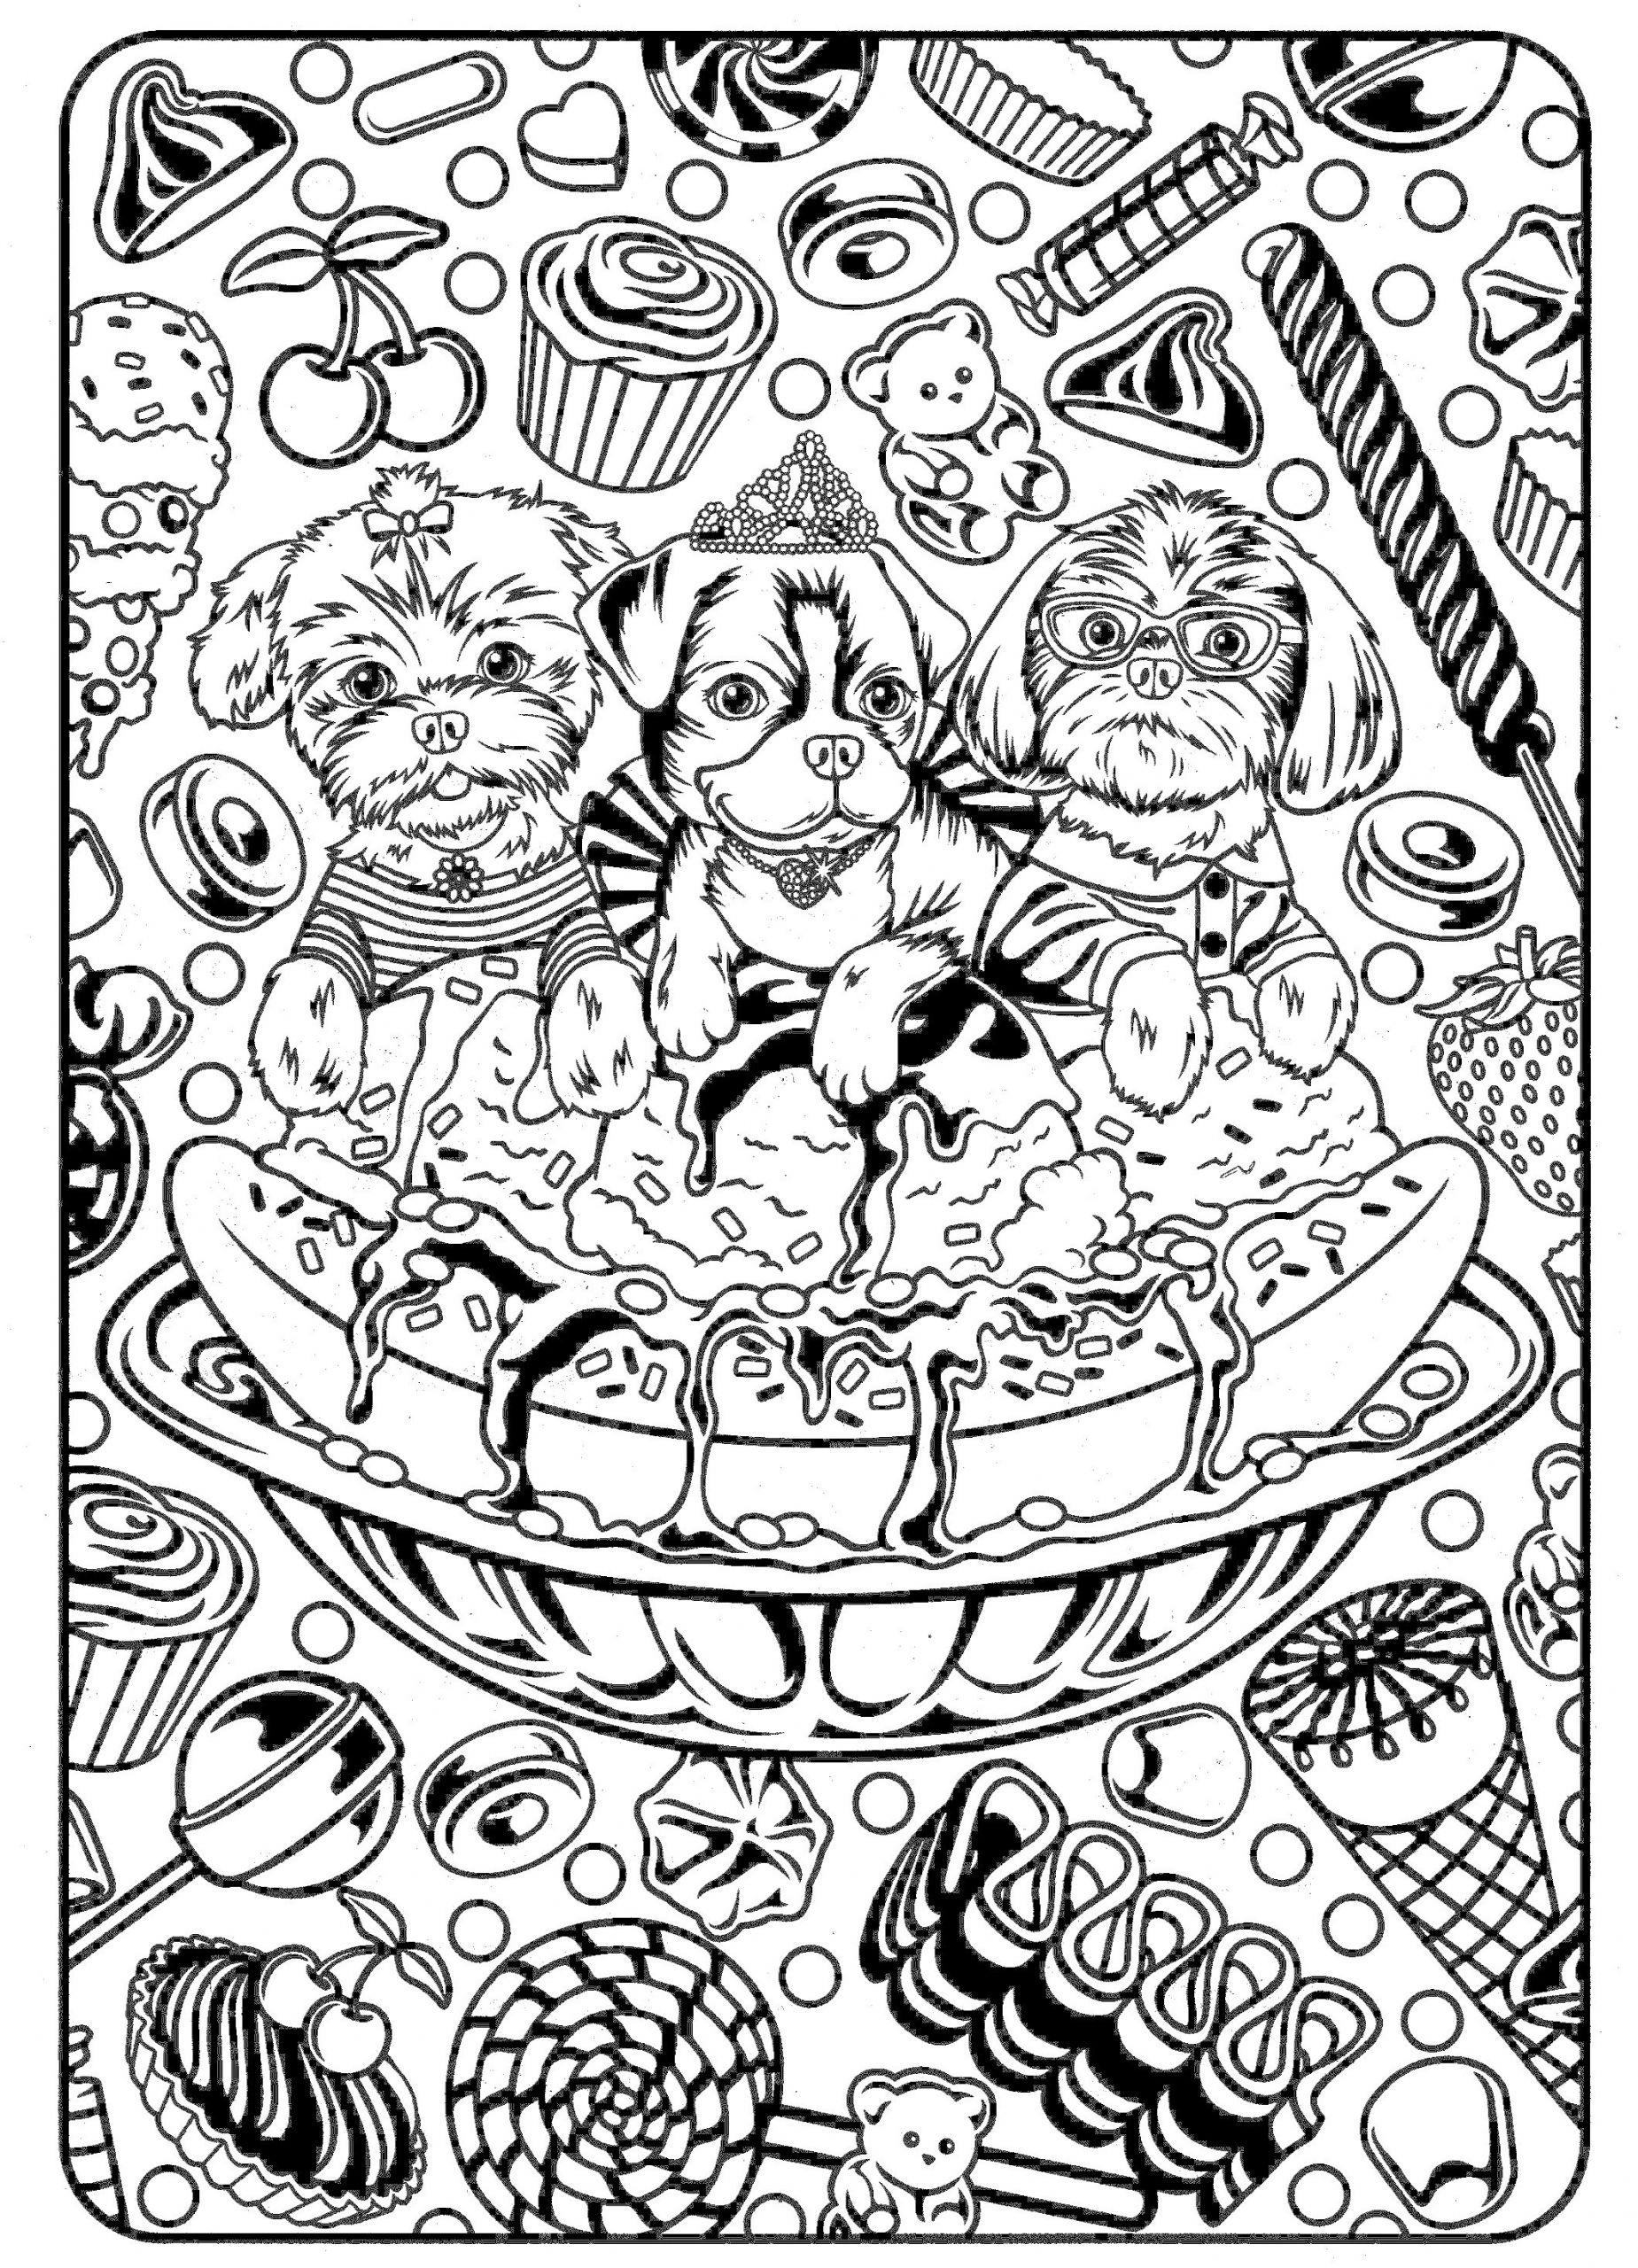 Coloring Pages Of Girls For Adults
 Cute Coloring Pages Best Coloring Pages For Kids